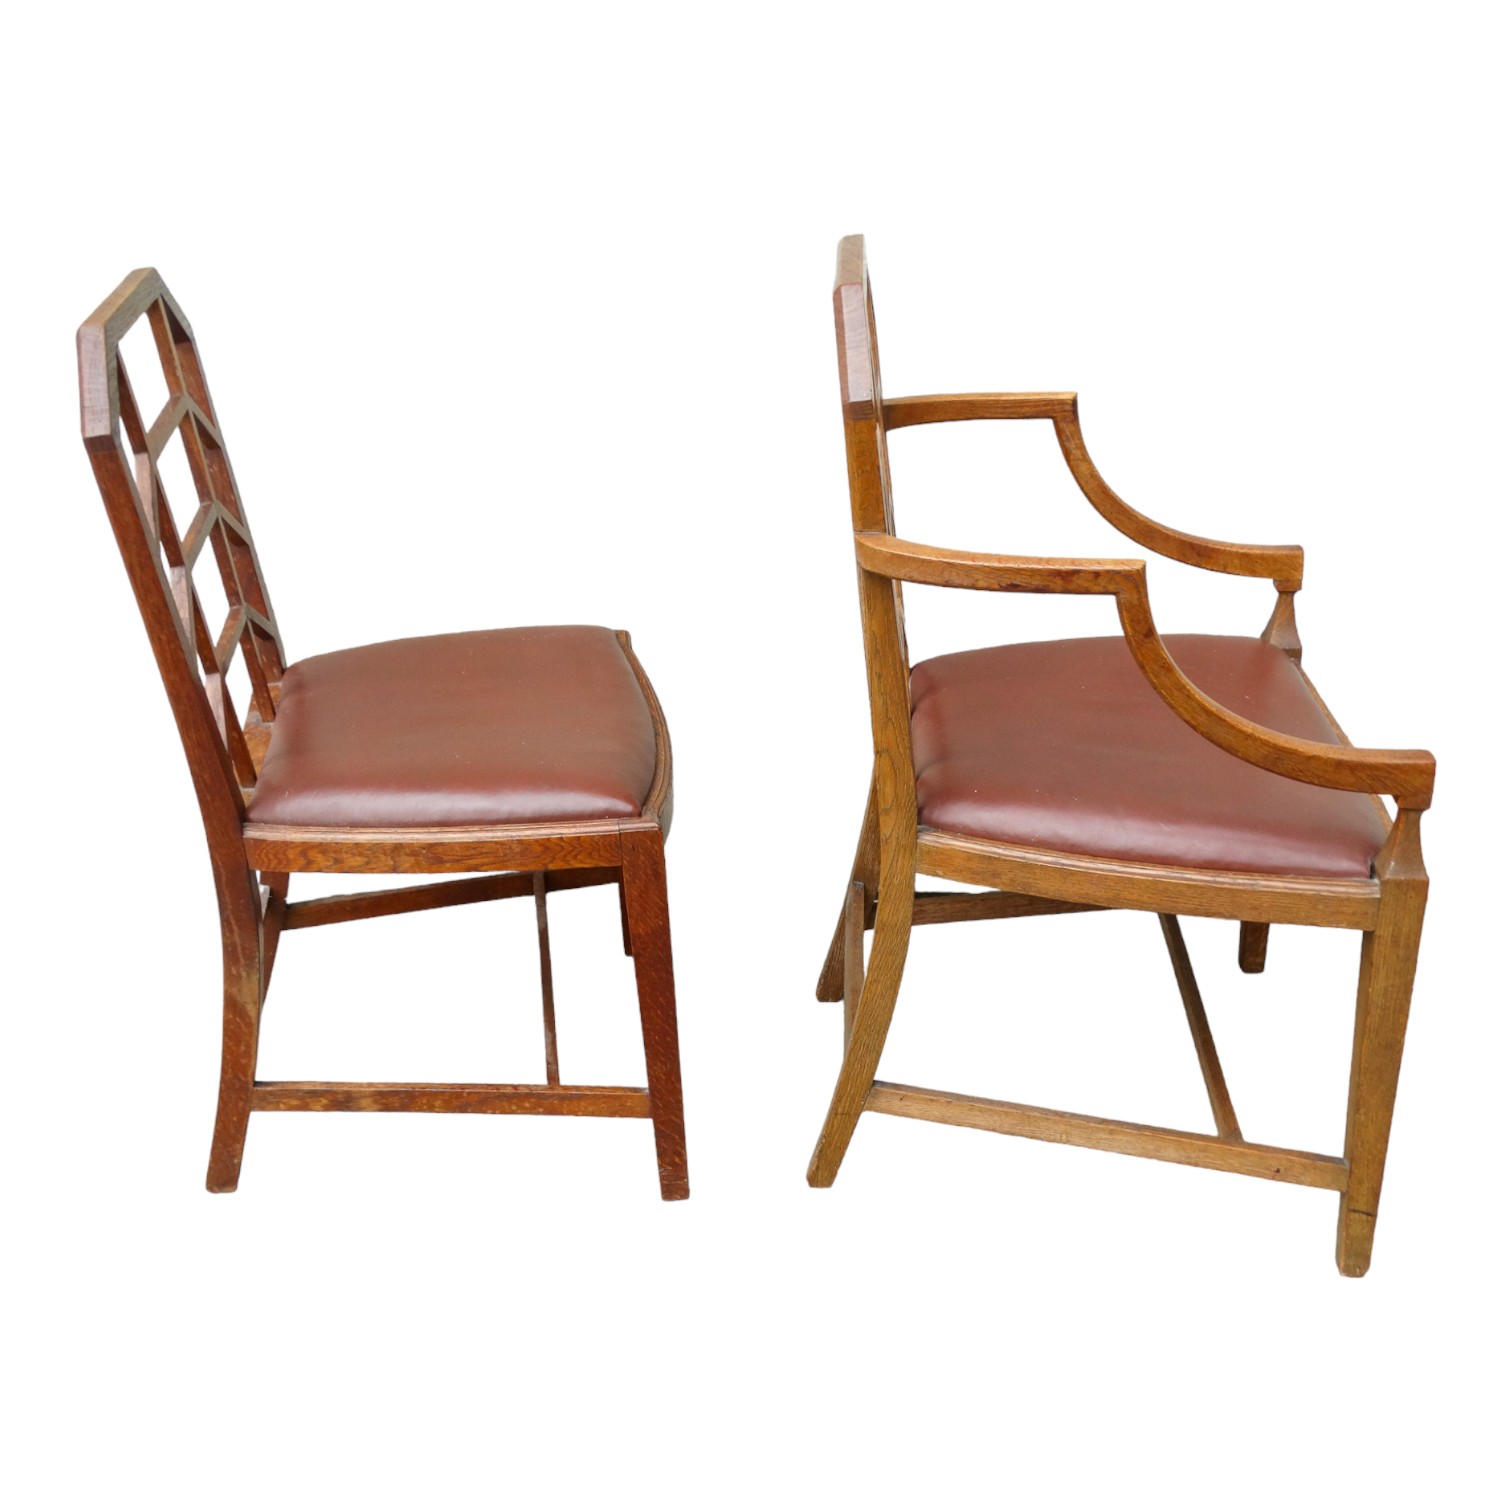 A set of early 20th century oak dining chairs - in the Arts & Crafts manner, after Heals, two with - Image 5 of 6